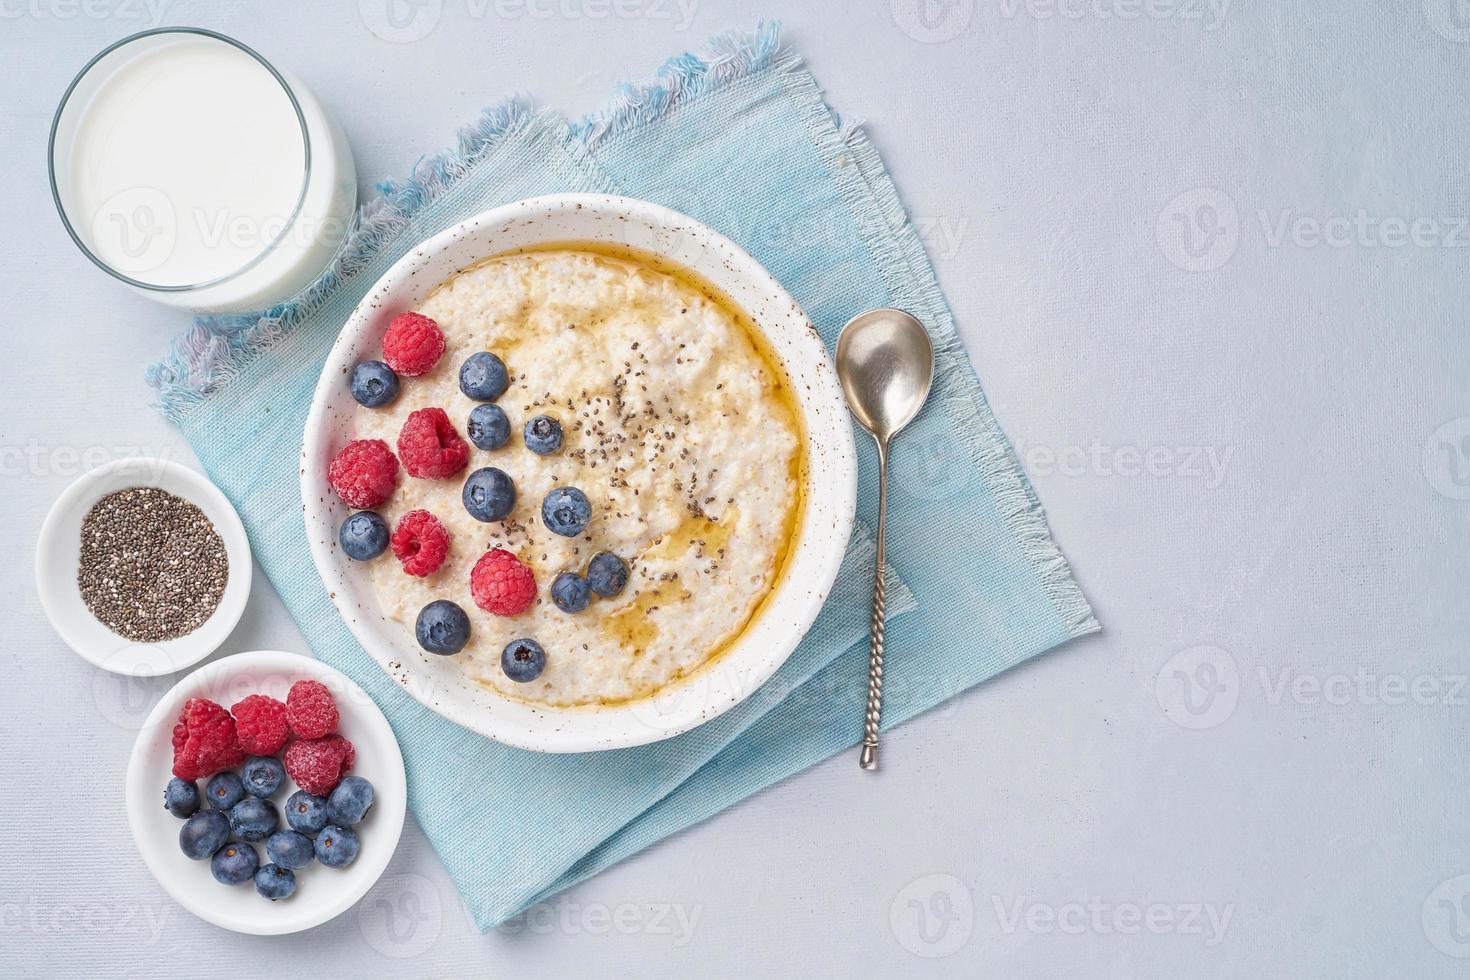 Oatmeal with berries, chia, maple syrup and glass of milk on blue light background. Top view, copy space. Healthy diet breakfast photo